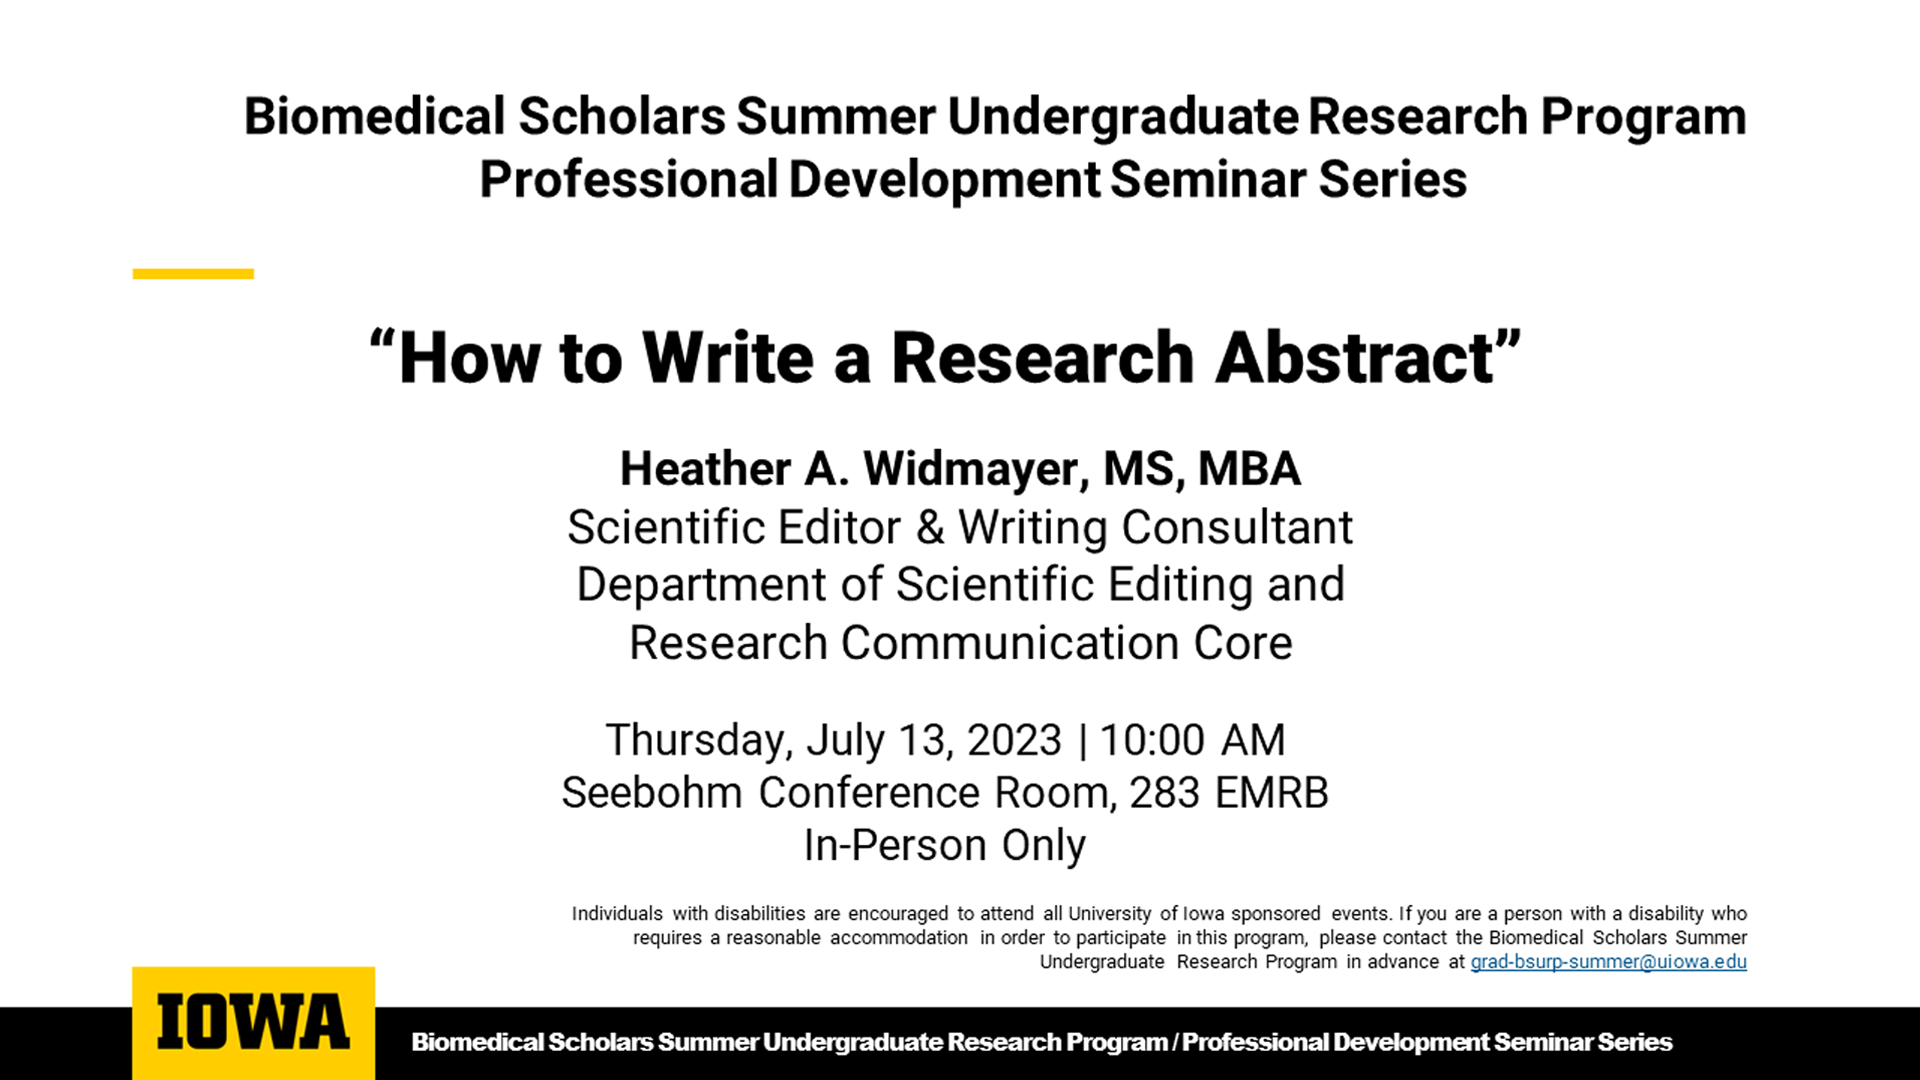   How to write a research abstract - 7.13.23  at 10 am